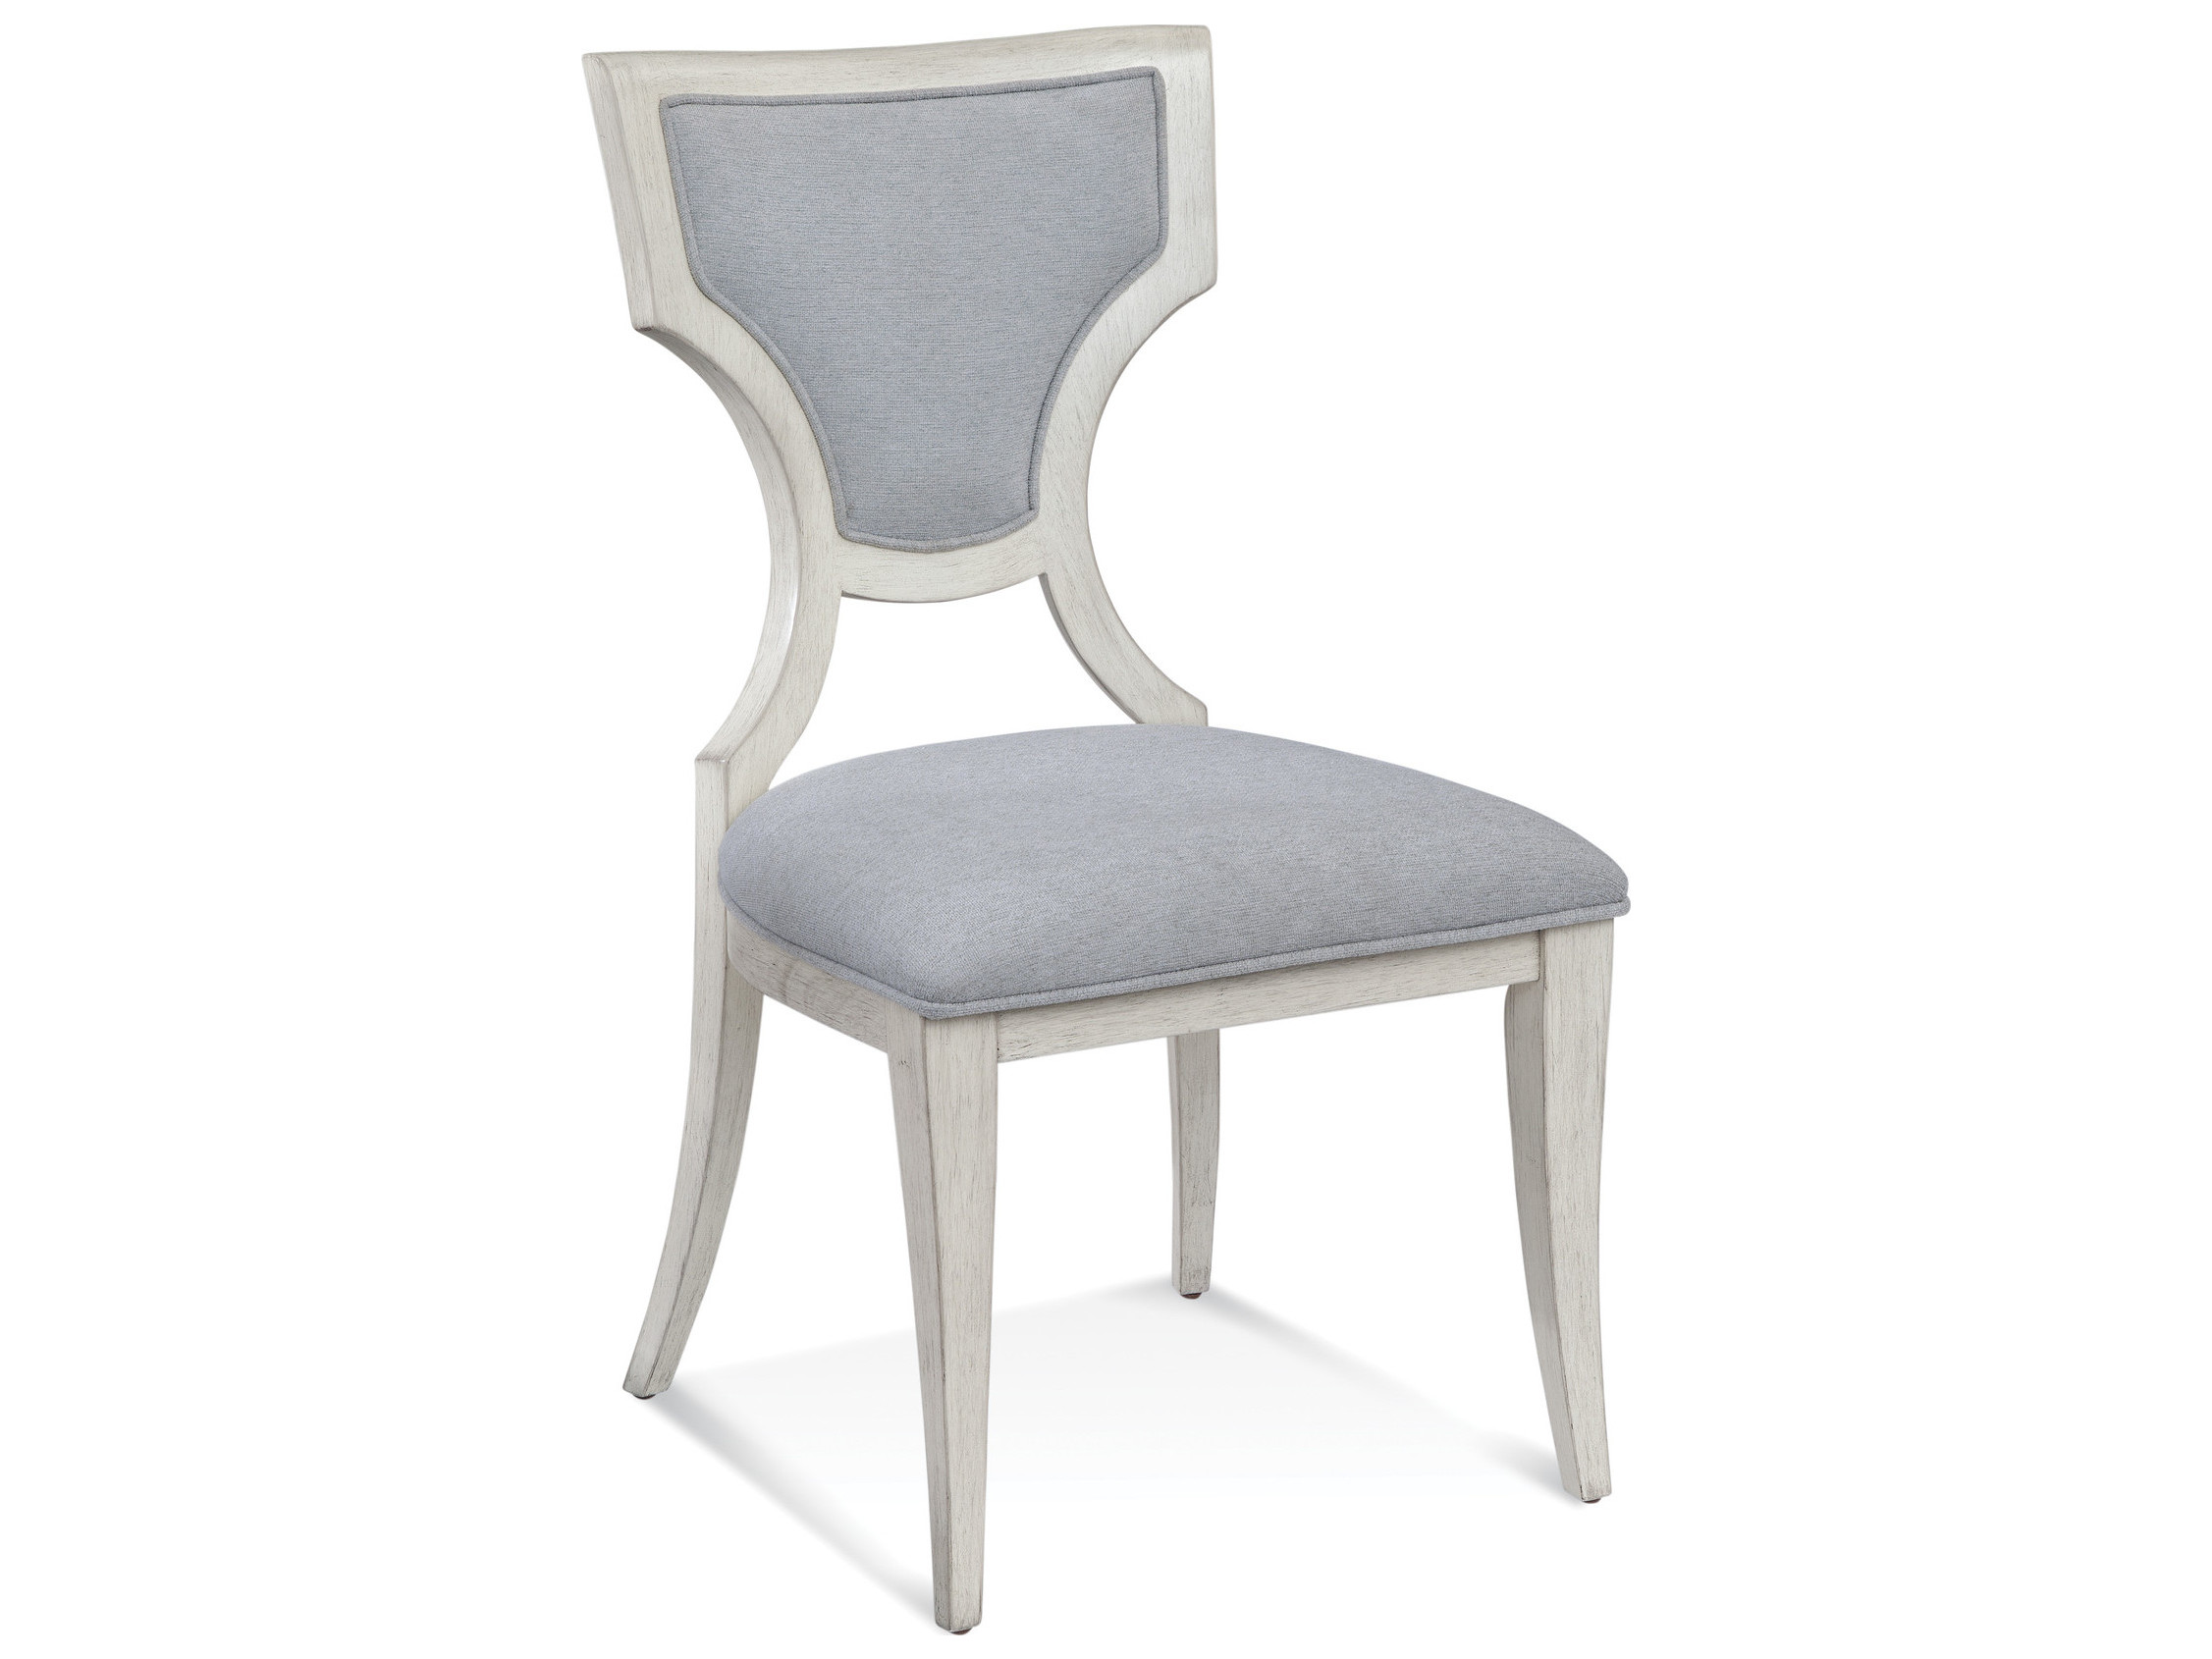 Bassett Mirror Maxine Ivory Penelope Mint Side Dining Chair Sold In 2 Ba6050dr800